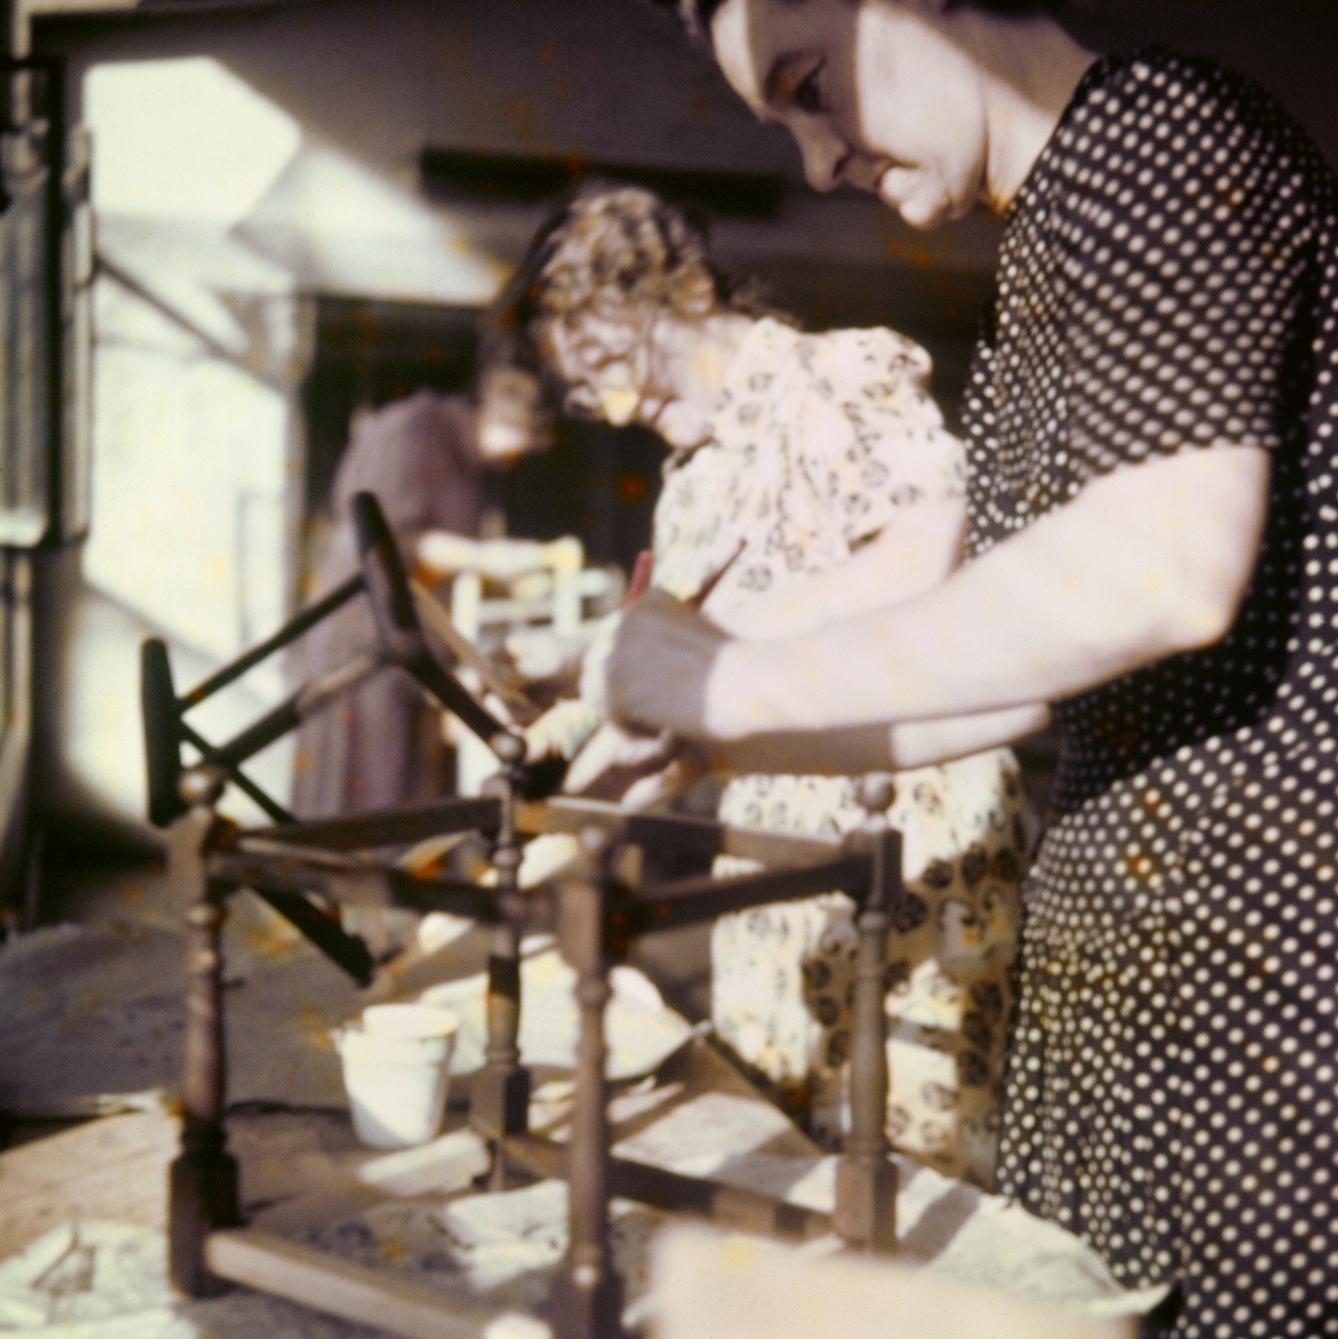 Photograph from the mid-20th Century Peckham Pioneer Centre, showing three women who appear to be assembling and staining some sort of wooden furniture, possibly the bottom of a chair.